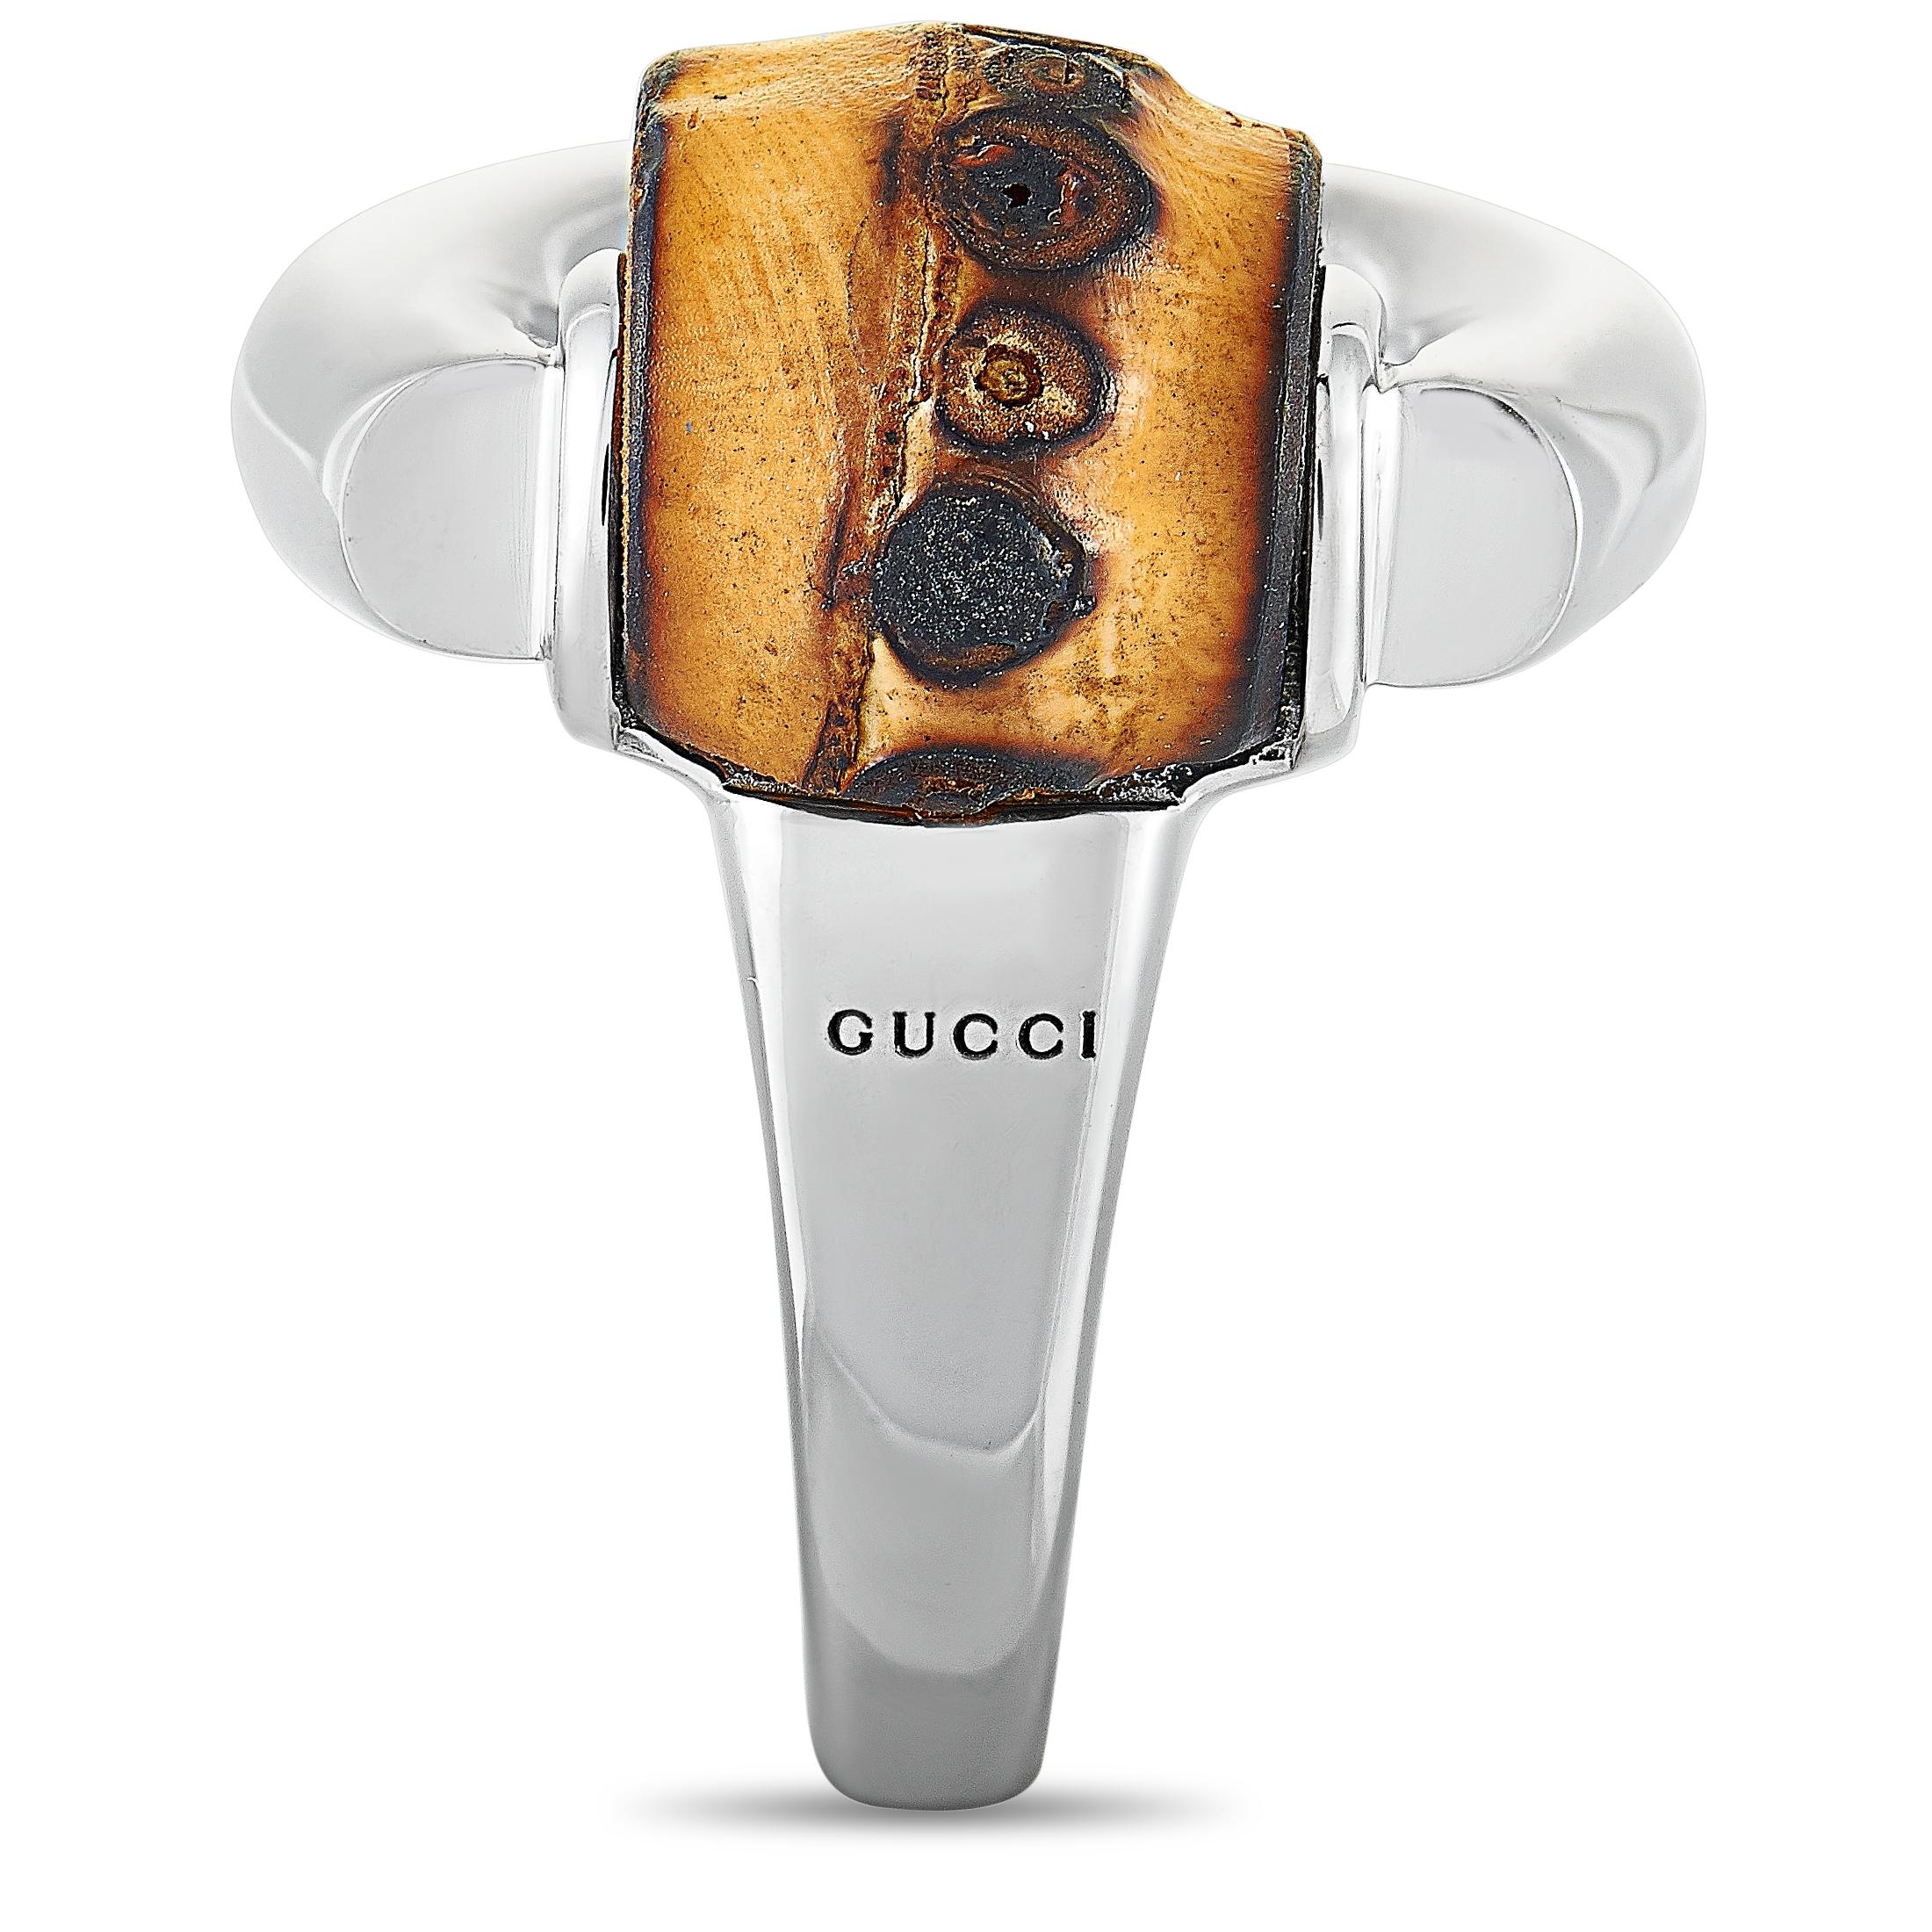 The Gucci “Bamboo” ring is made out of silver and natural bamboo and weighs 18.5 grams. The ring boasts band thickness of 3 mm and top height of 10 mm, while top dimensions measure 23 by 22 mm.
 
 This item is offered in brand new condition and